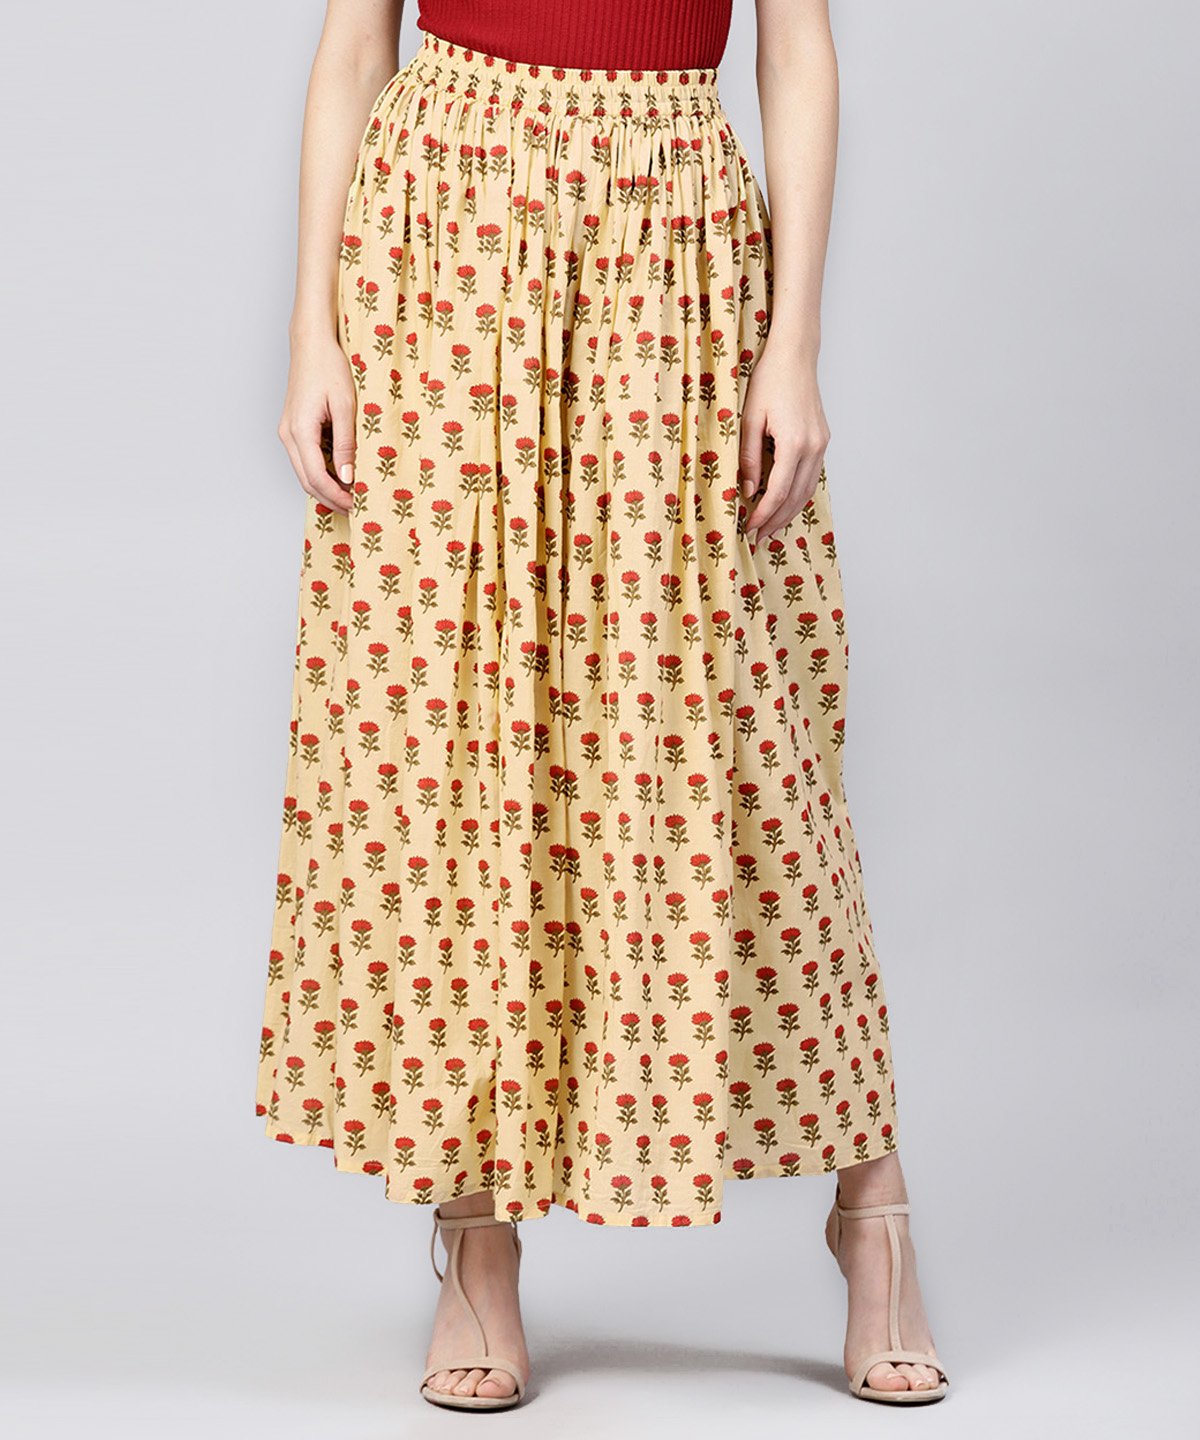 Women's Yellow Printed Cotton Ankle Length Flared Skirt - Nayo Clothing